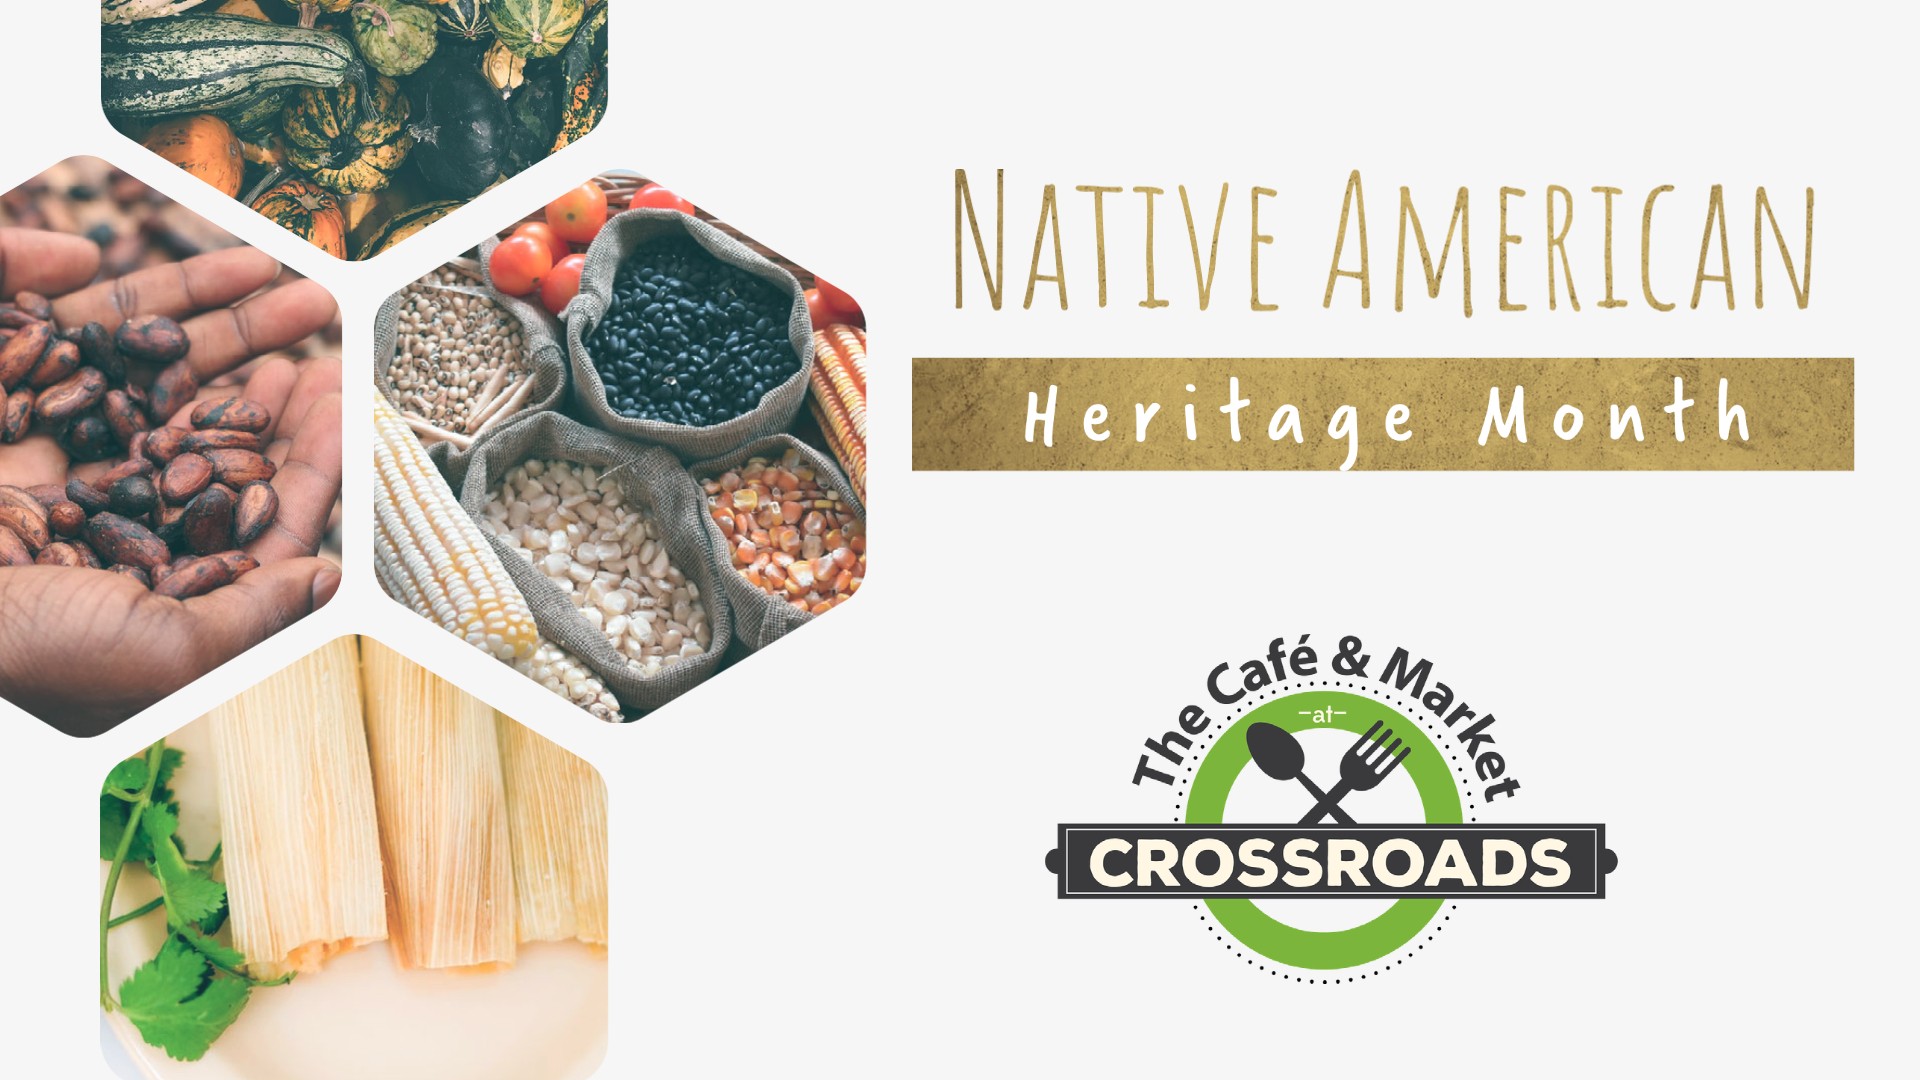 photos of corn, squash, and beans next to "Native American Heritage Month"